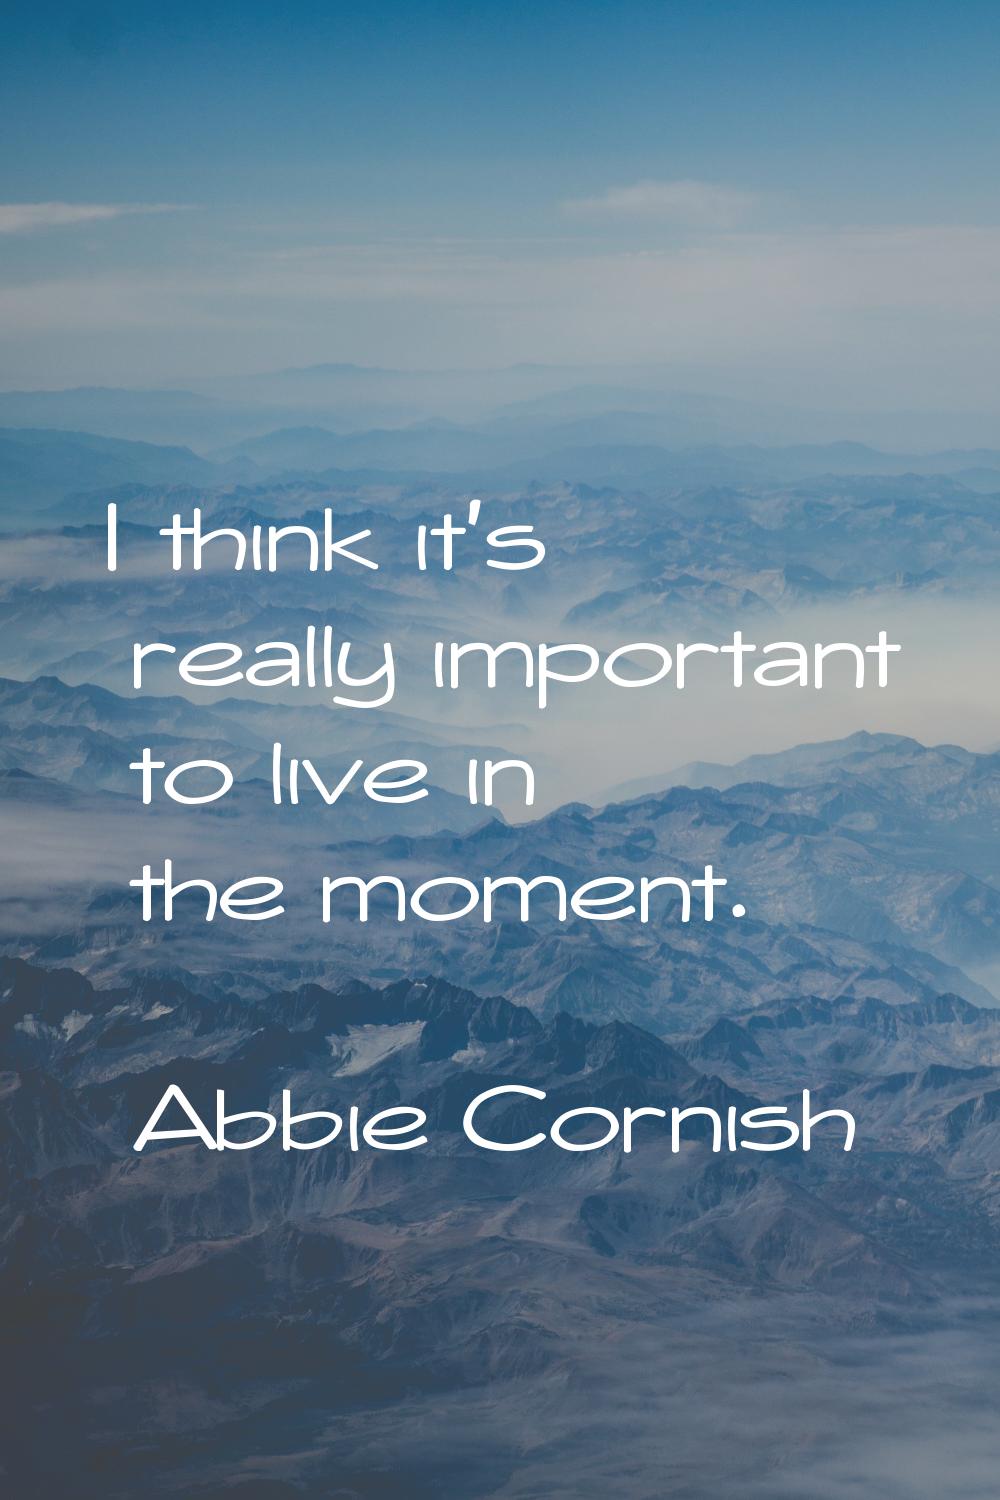 I think it's really important to live in the moment.